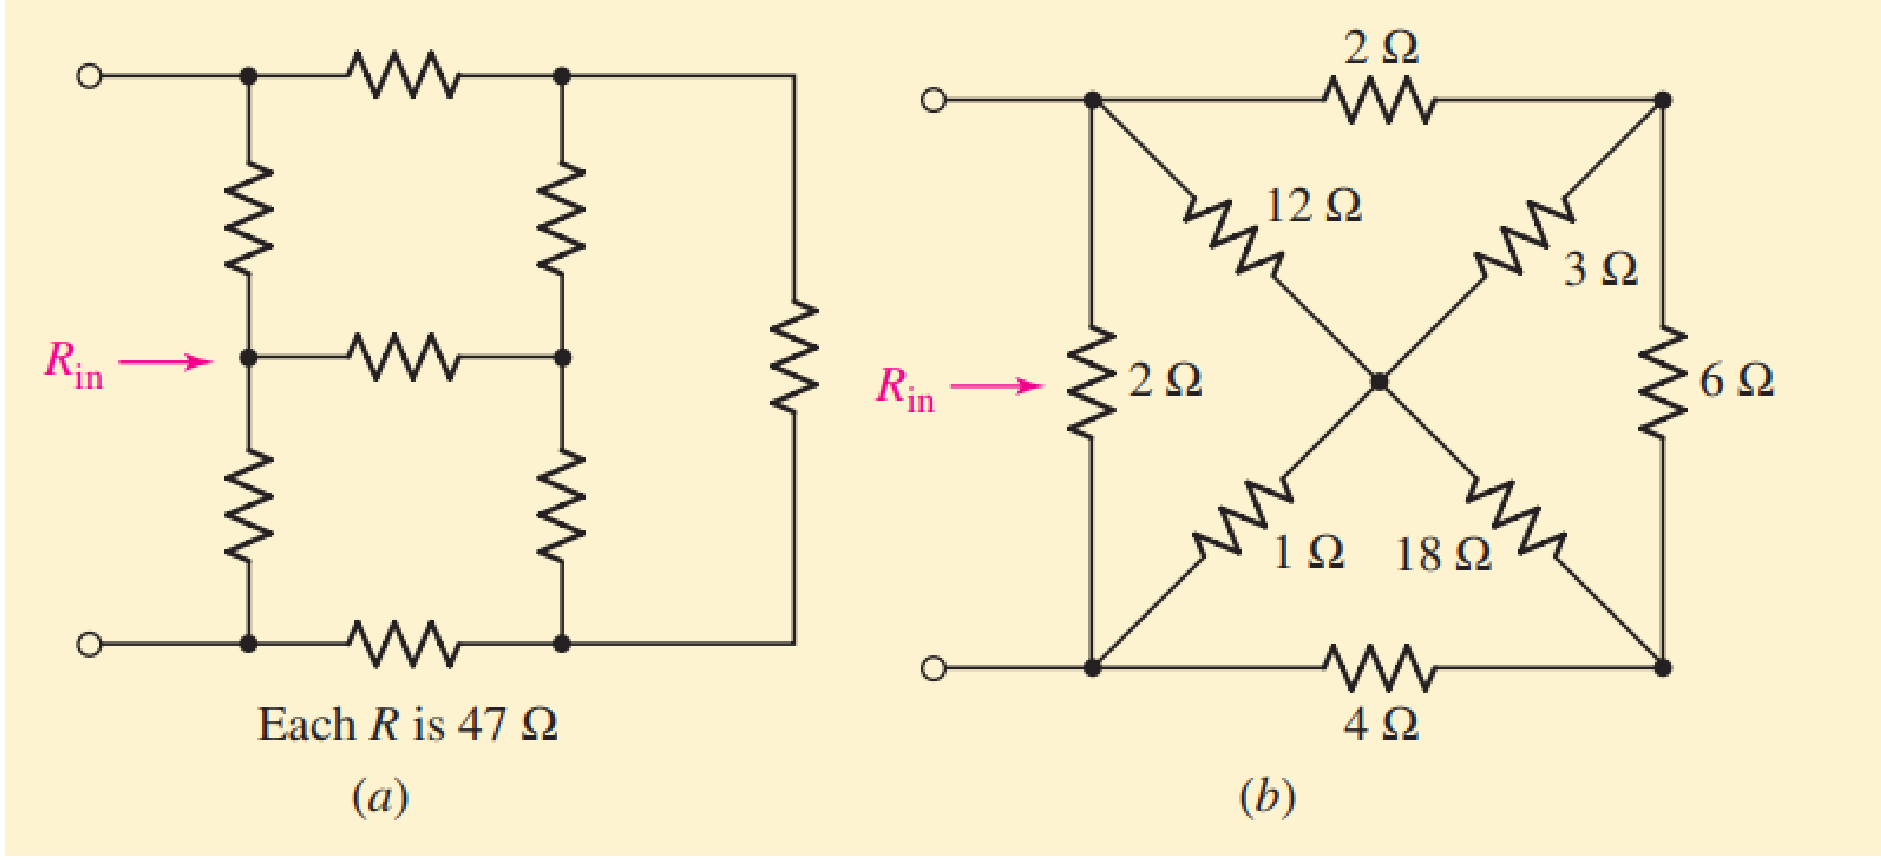 Chapter 16.3, Problem 7P, Use Y and Y transformations to determine Rin for the network shown in (a) Fig. 16.20a; (b) Fig. 